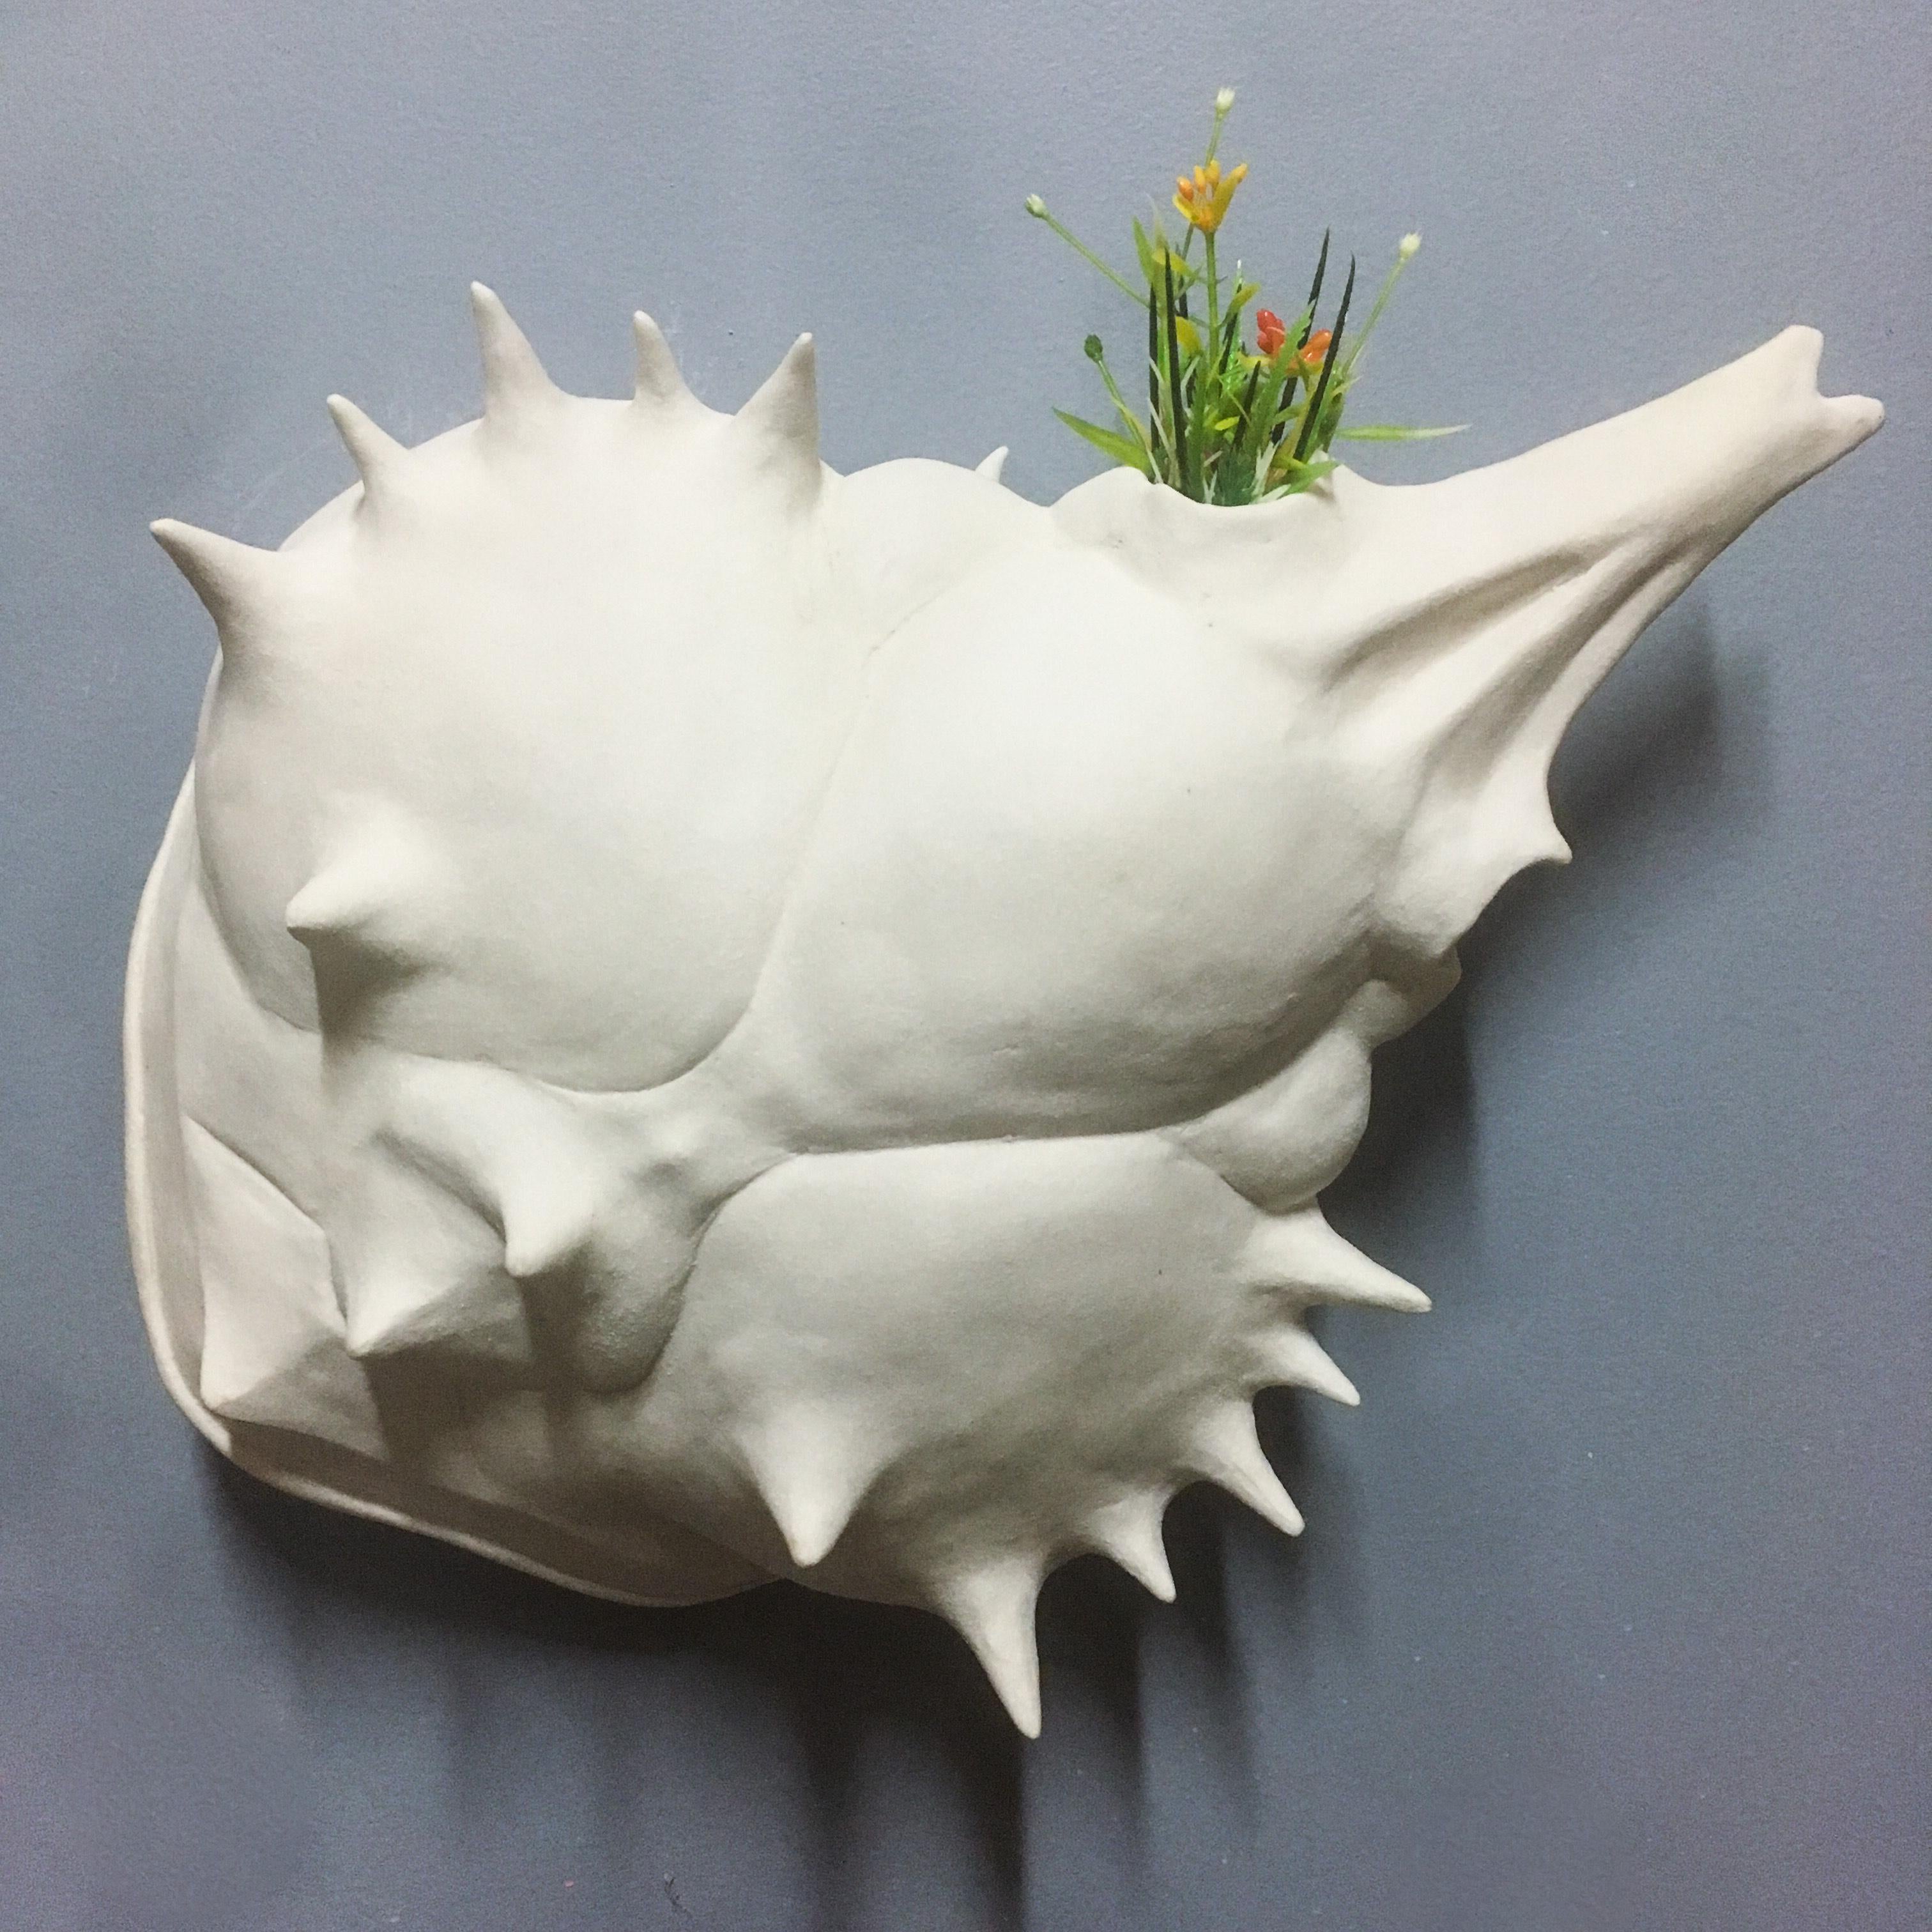 Bethany Krull Figurative Sculpture - Porcelain Wall Sculpture Crab Animal Flowers Krull Unique Rare Contemporary